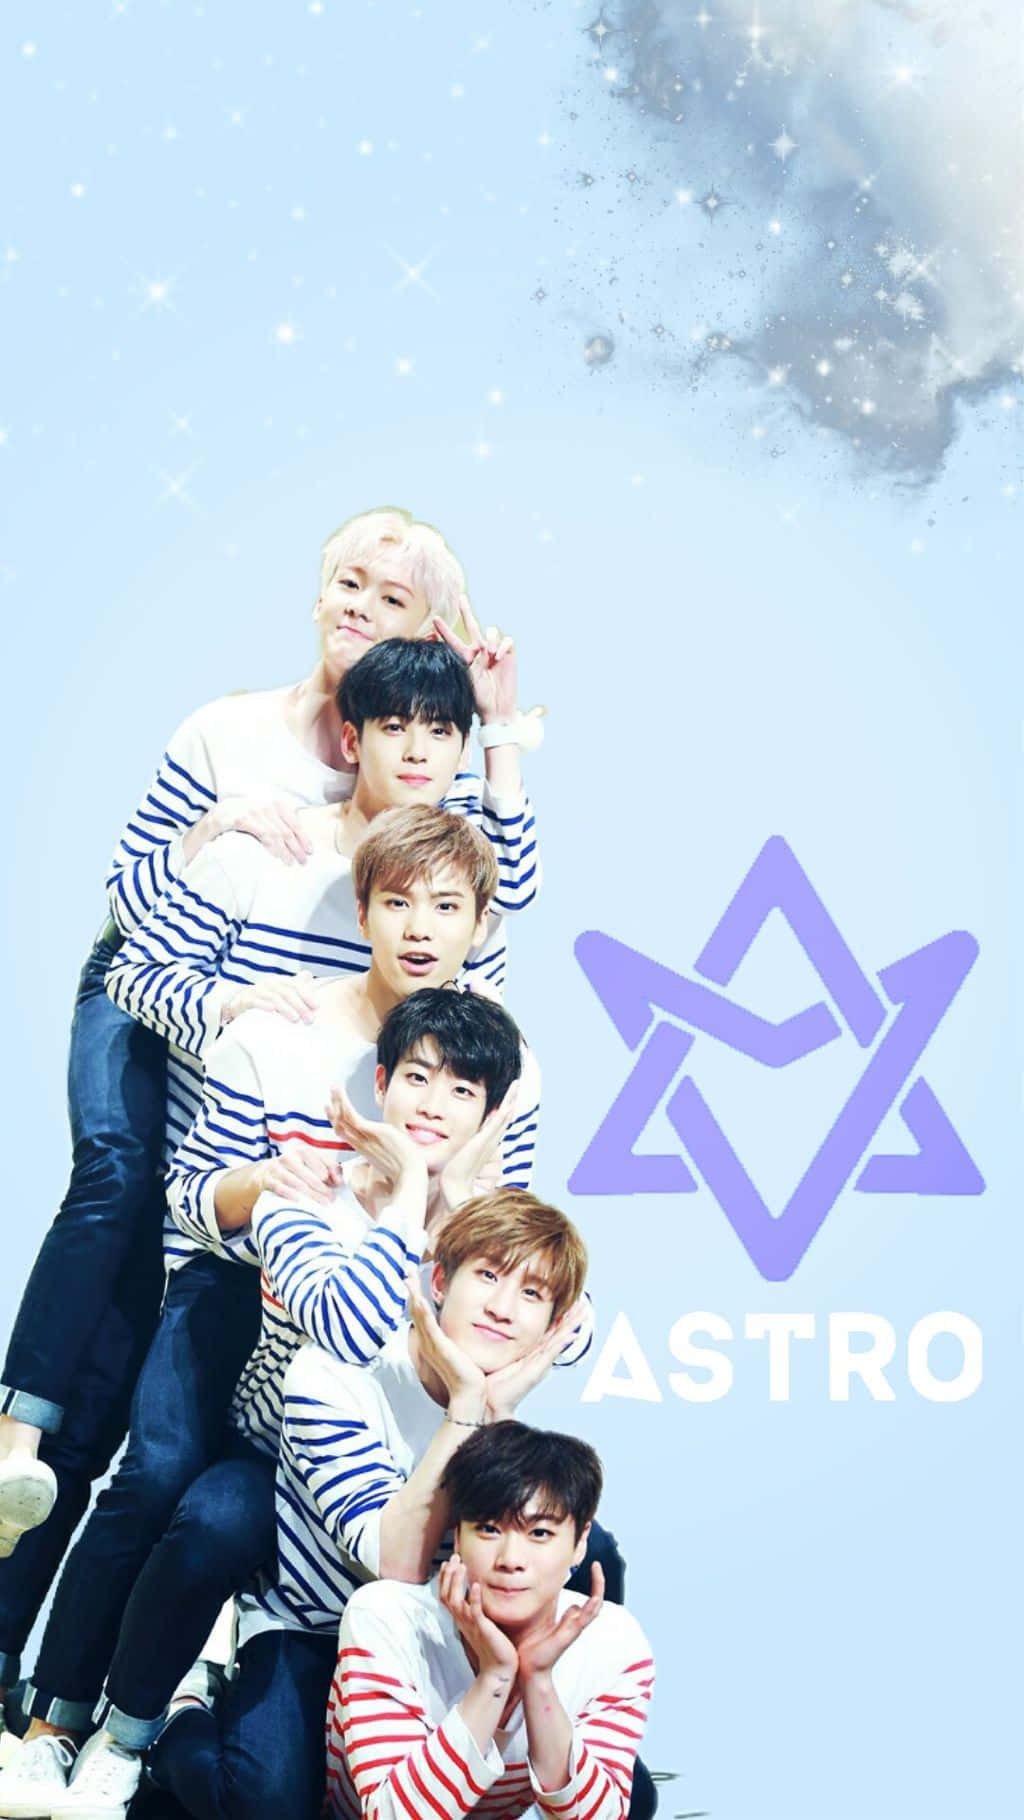 Astro Kpop Group Posewith Logo Background